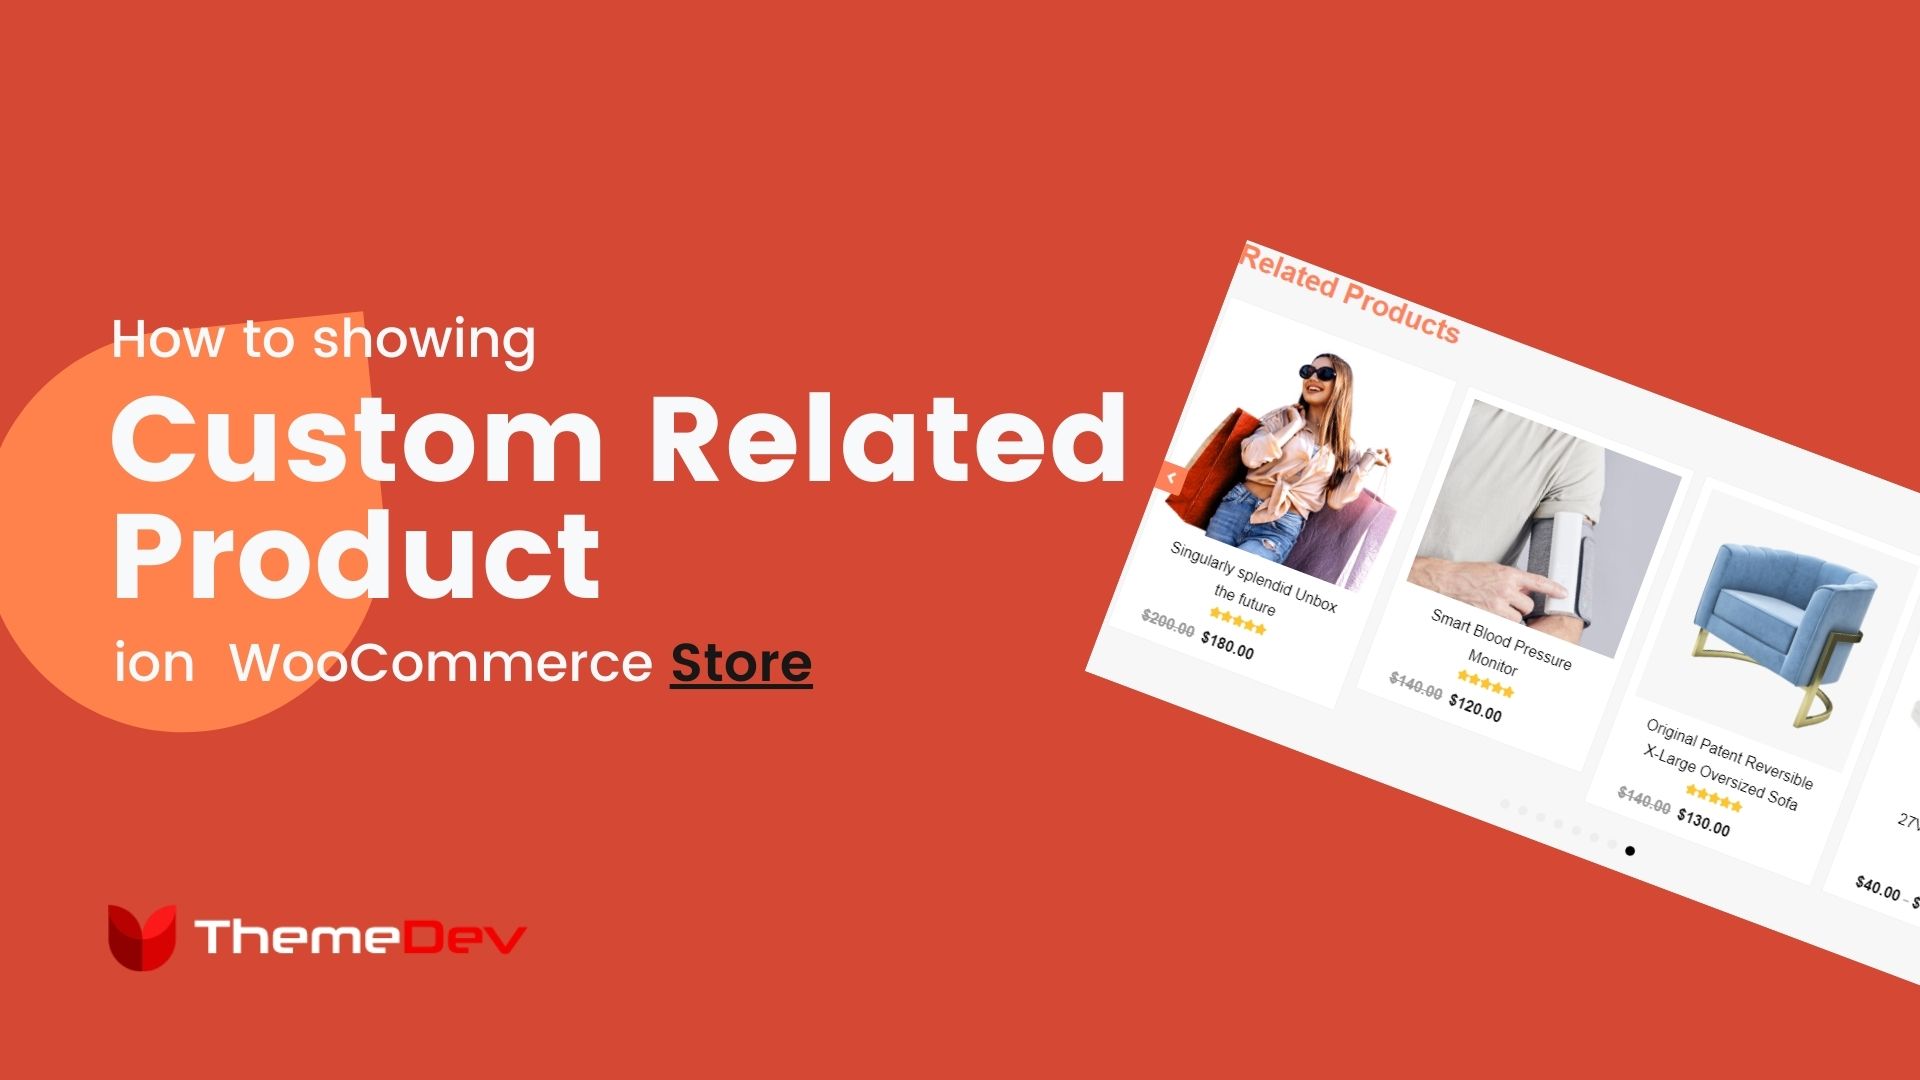 How to Showing Custom Related Products on a WooCommerce Store